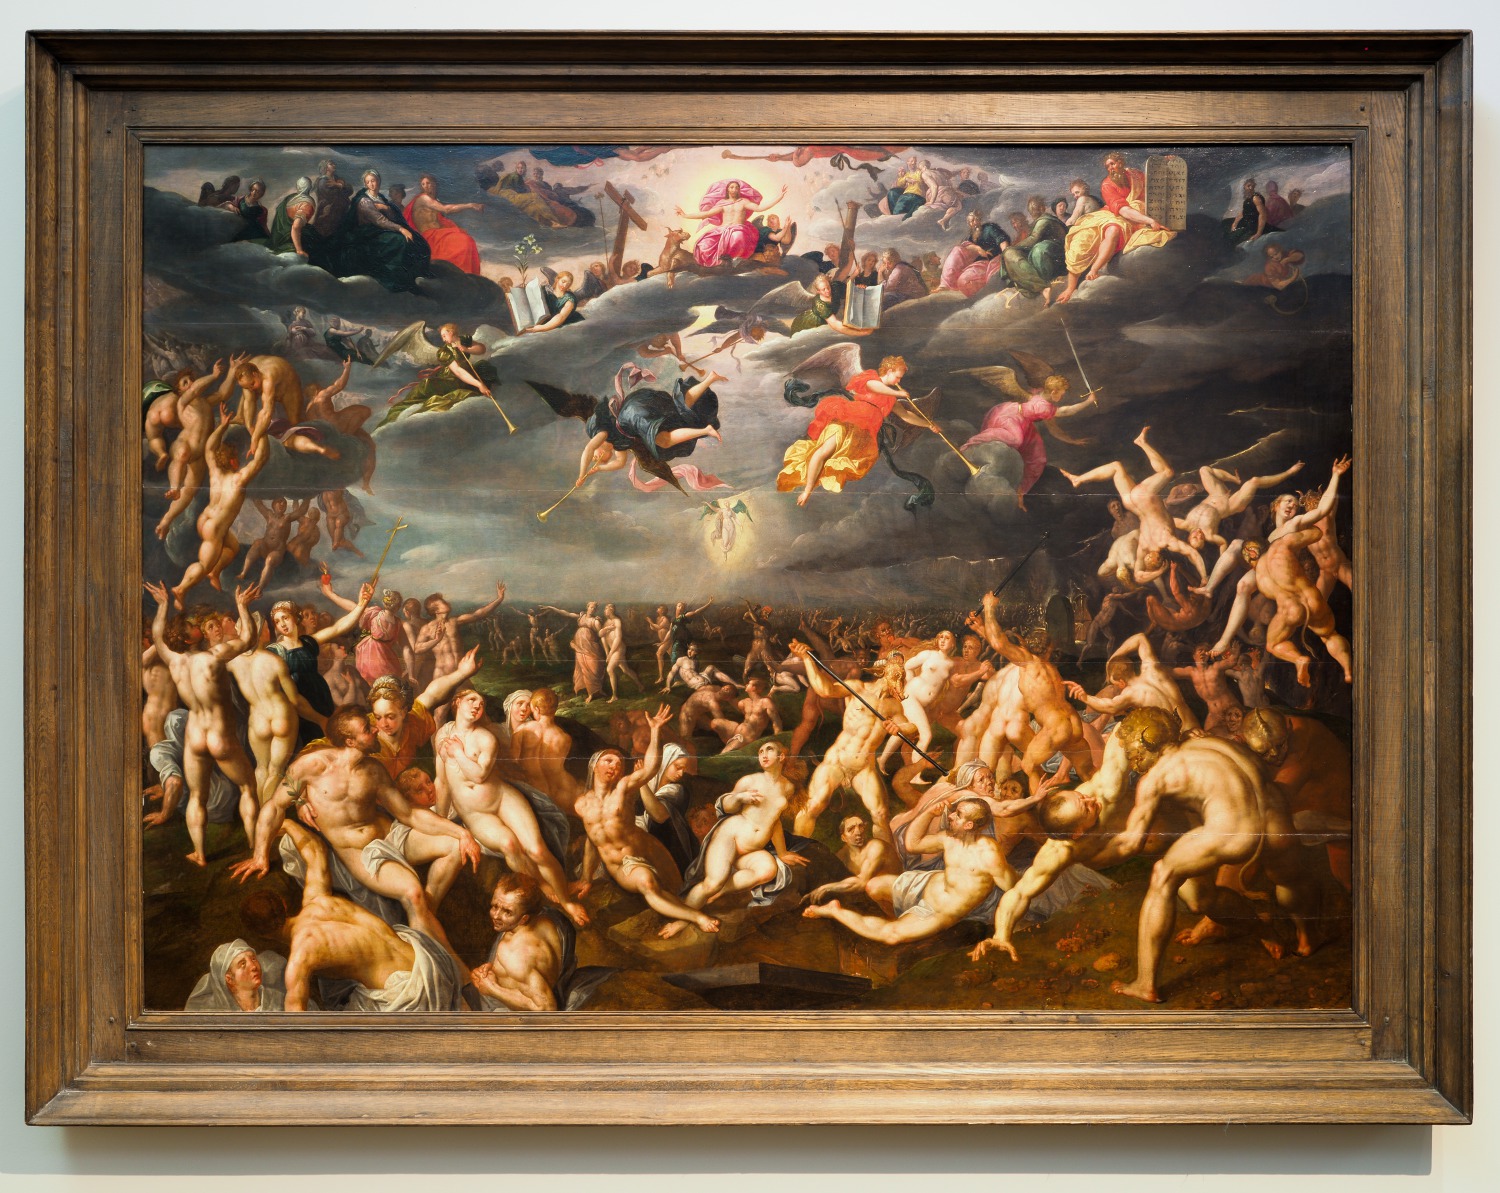 Jacob de Backer the Younger, The Last Judgement, 16th century. Oil on panel. Long term loan from Schorr Collection.